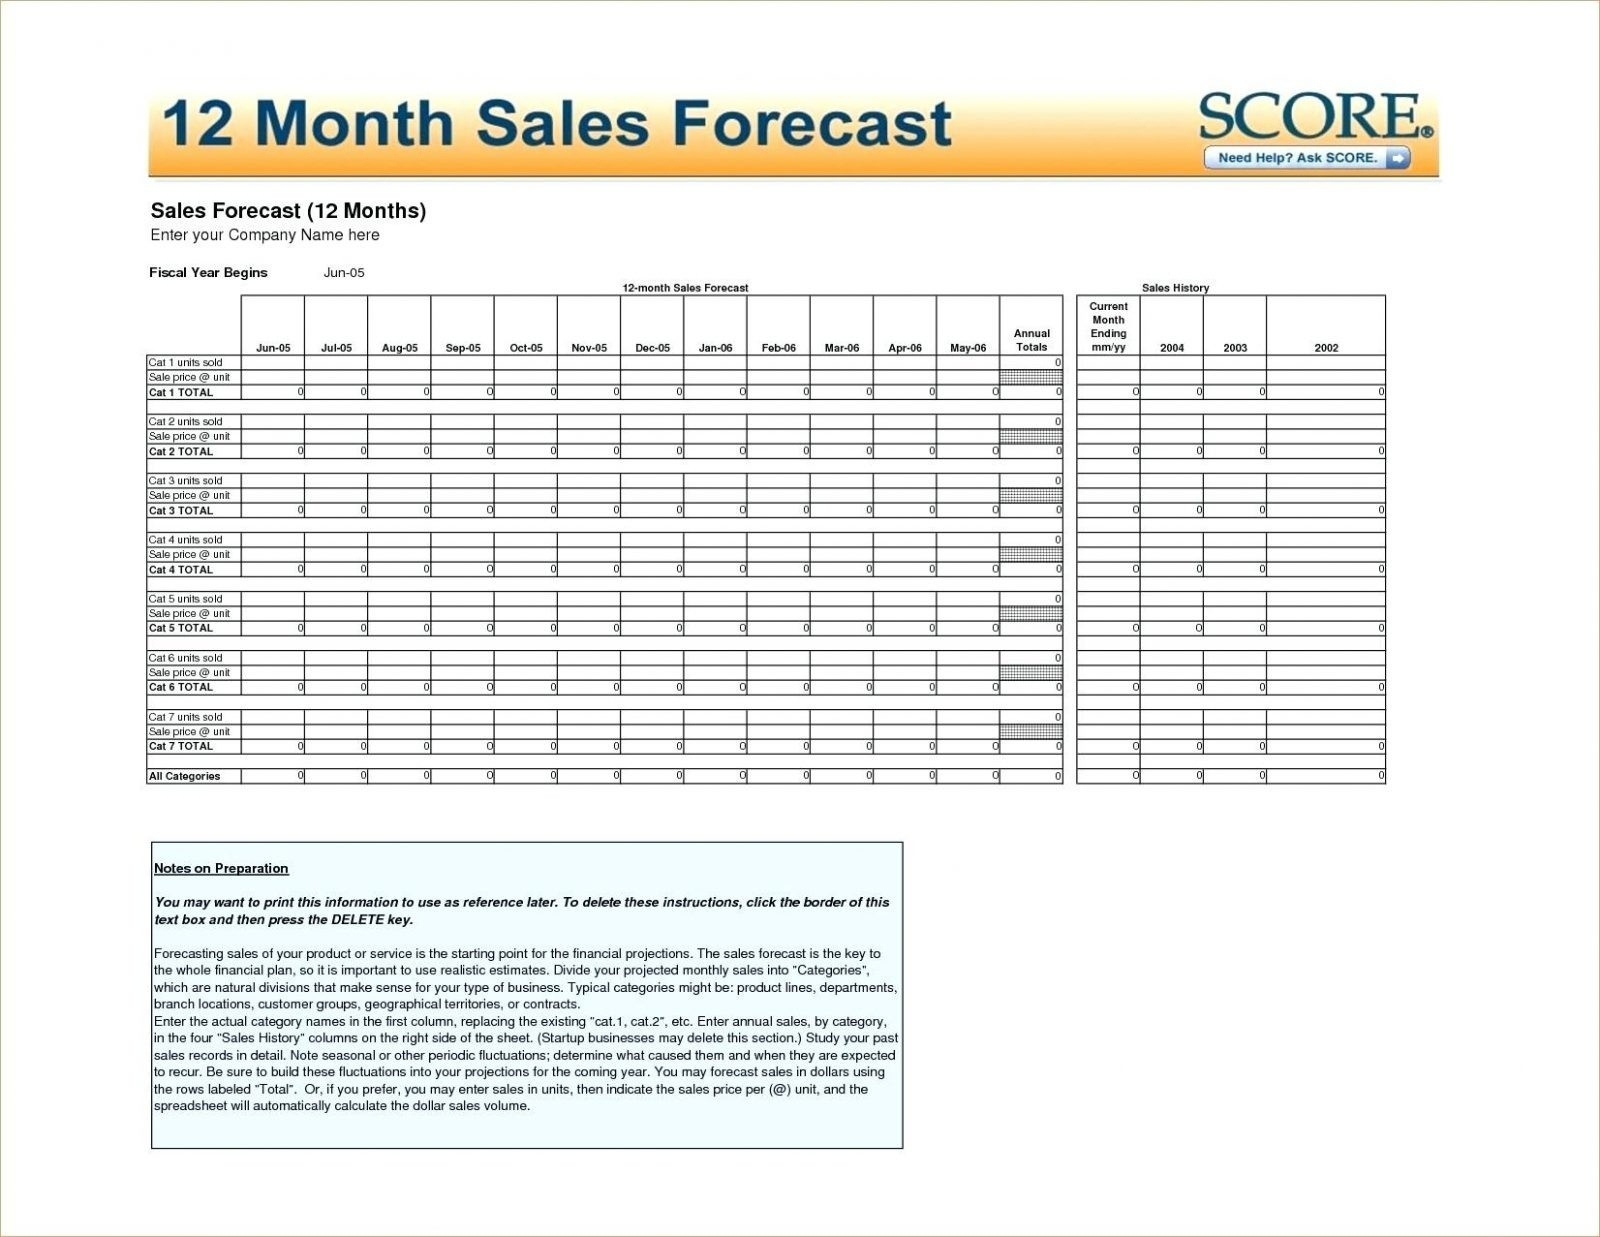 Sales Forecast Template For Startup Business Simple Business Plan In Sales Forecast Template For Startup Business